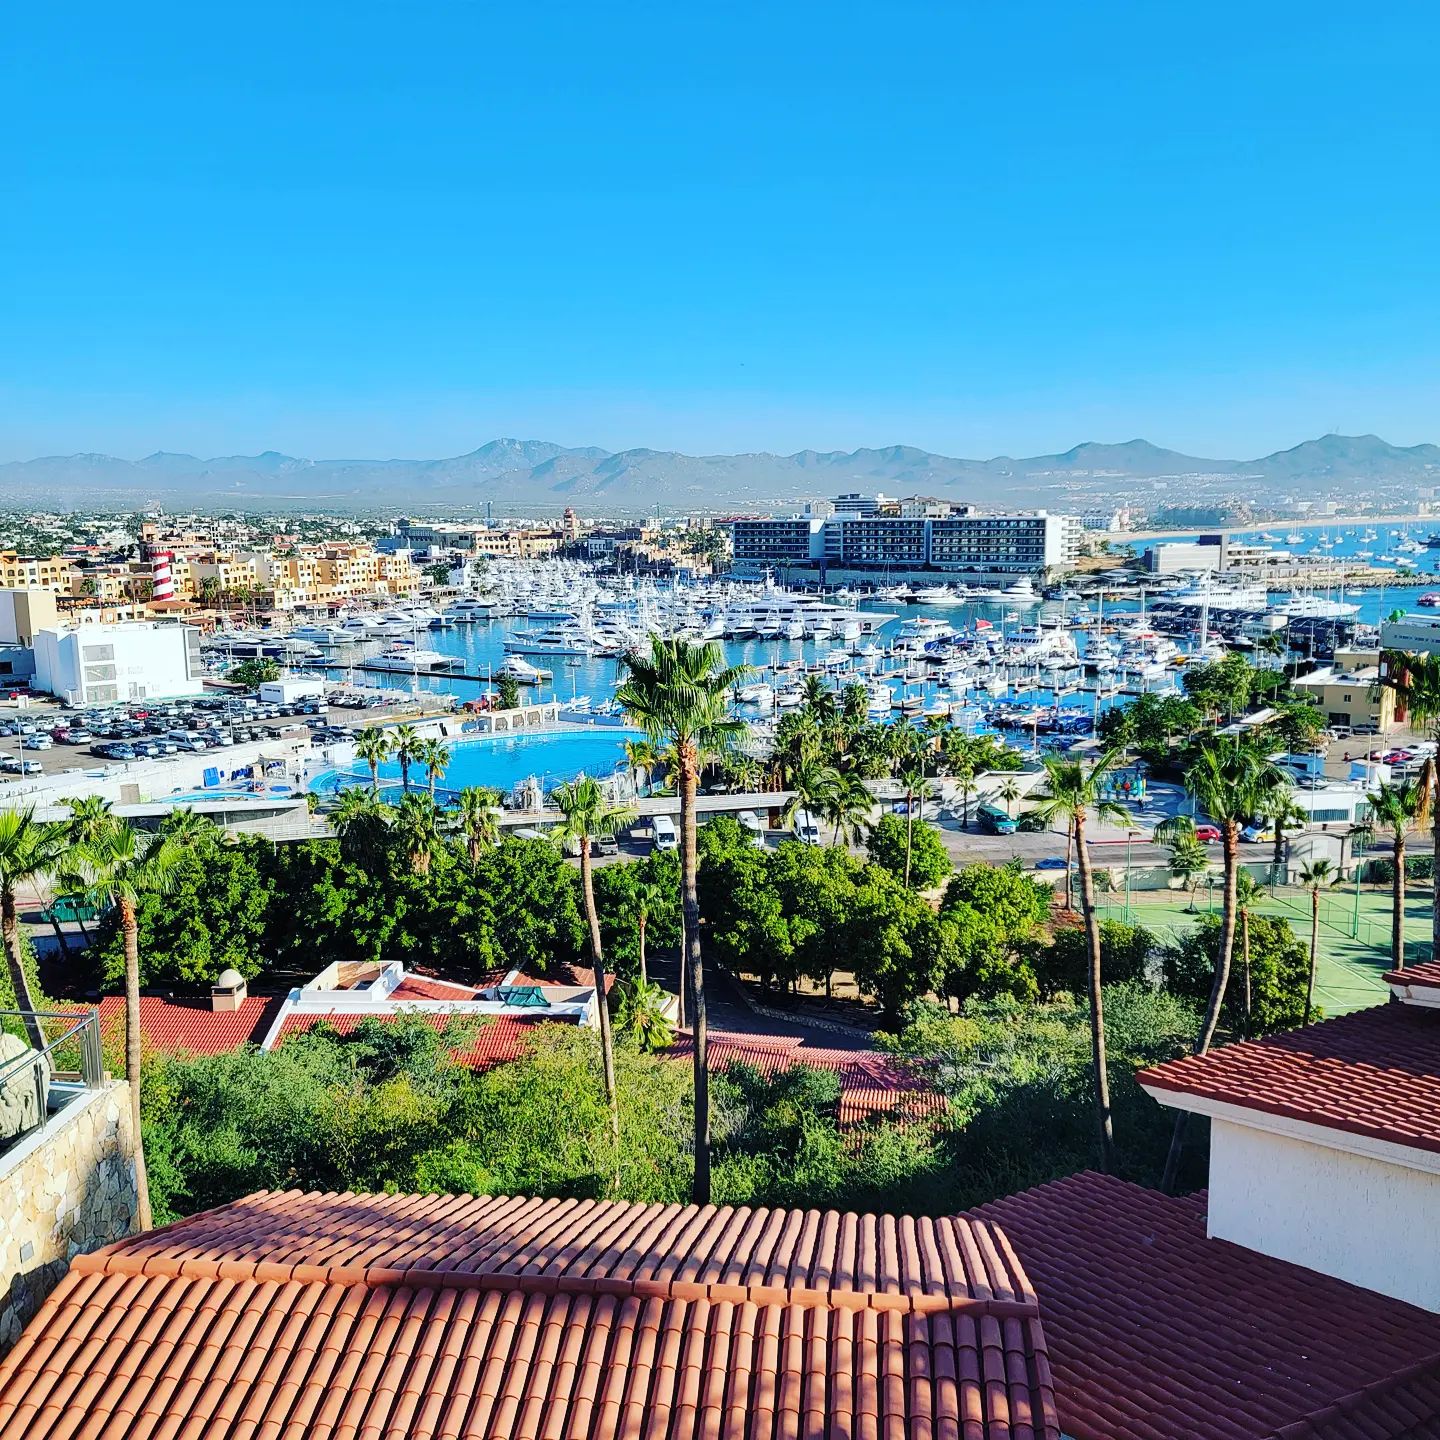 LOS CABOS🌴🇲🇽 
So beautiful! It's been a hot minute since I've connected with you beautiful people. This week I am in Los cabos Mexico, and I'll be sharing my experiences with you✌.

Look for posts, videos, lives and stories. Any questions pop them below👇